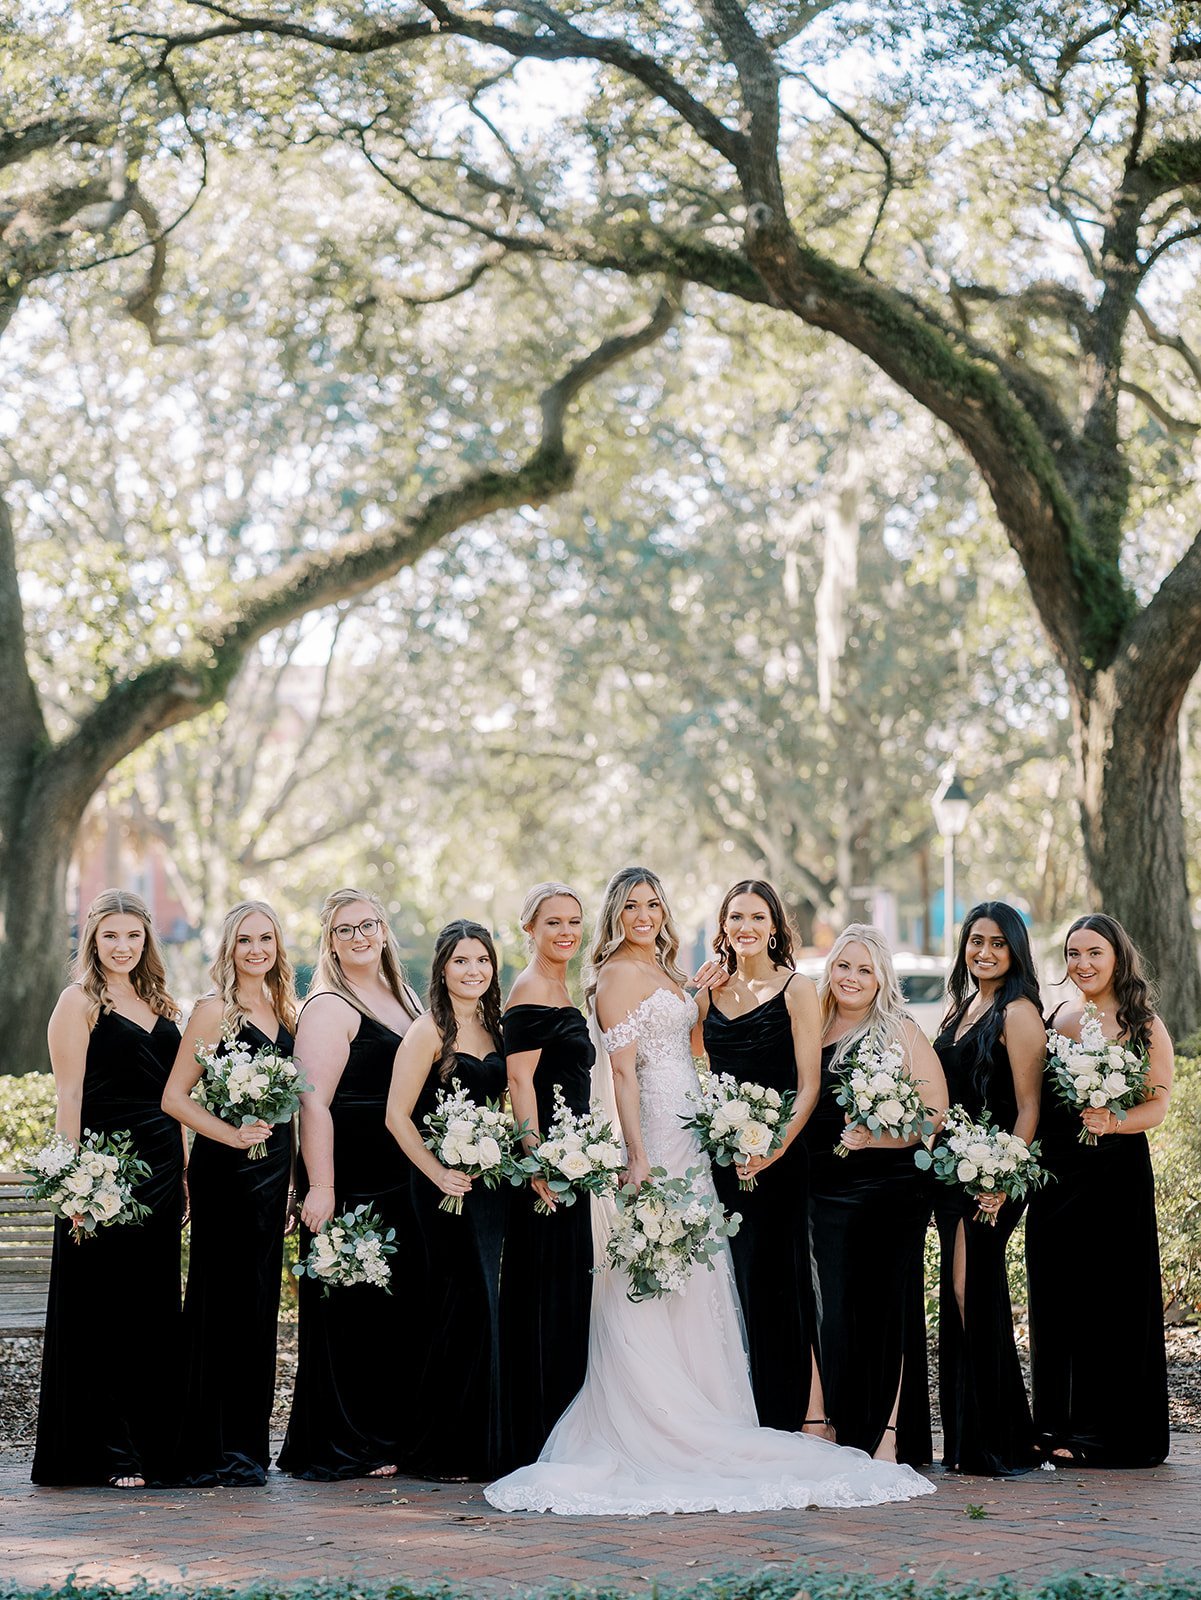 black modern bridesmaids dresses and ivory bouquets